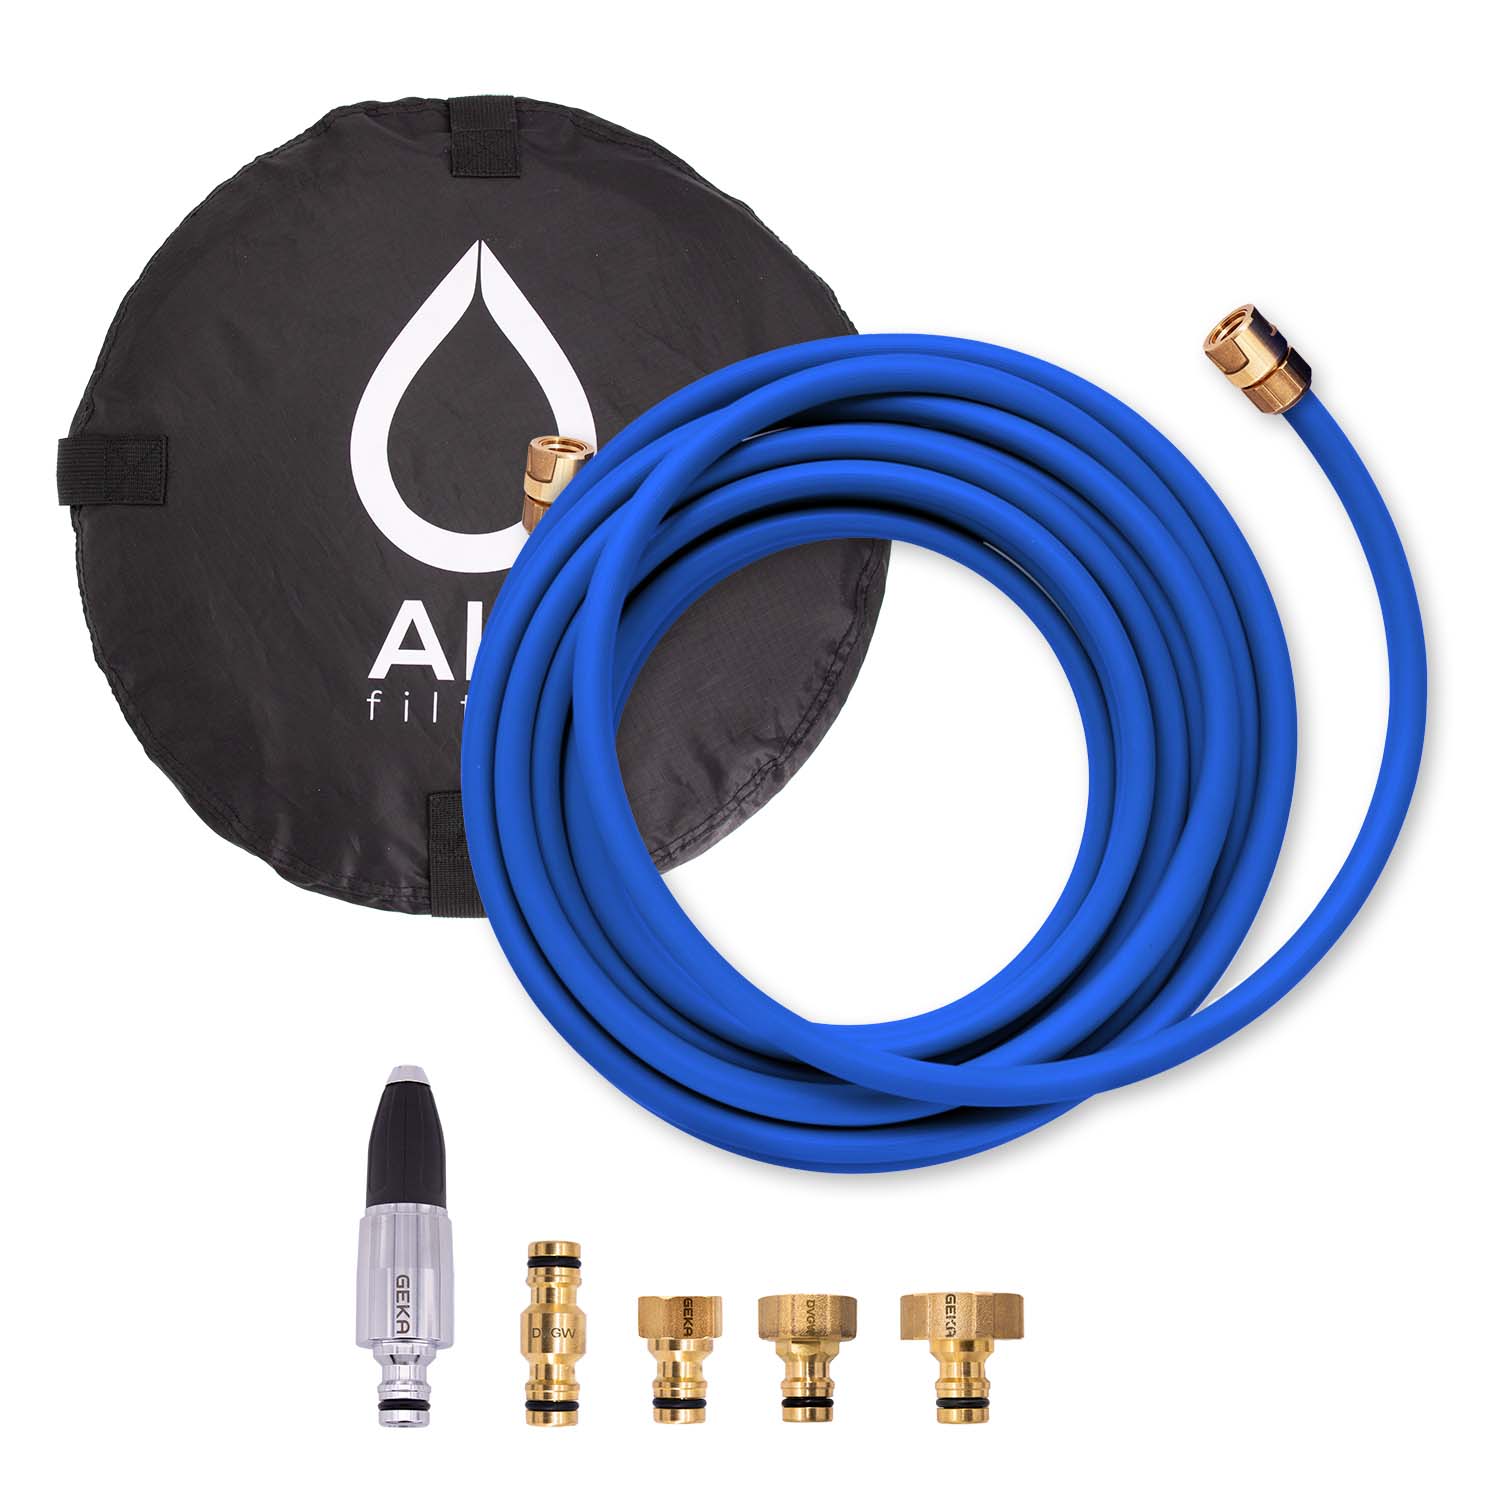 Camp WaFi Das Camping Wasserfilter System - zooom